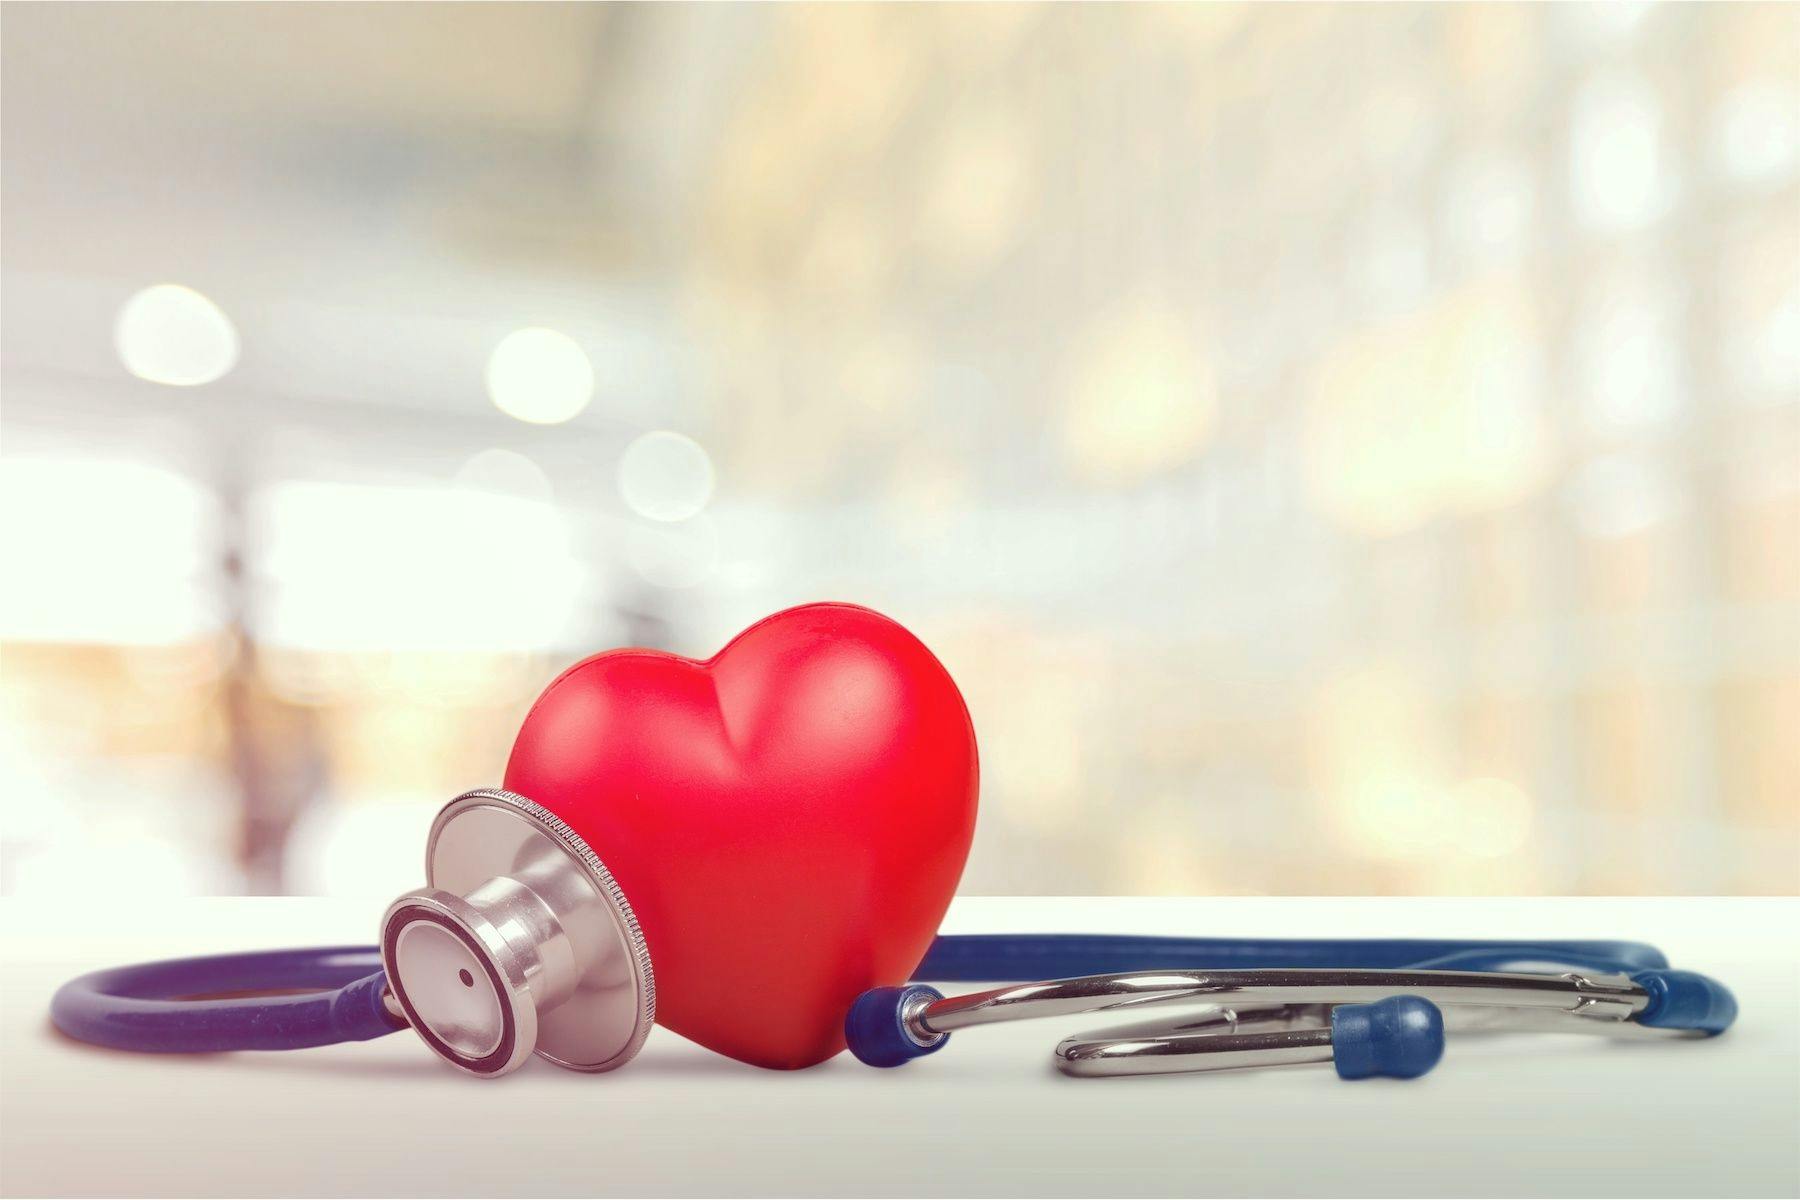 Researchers addressed patient outcomes for improving cardiovascular health. | image credit: BillionPhotos.com / stock.adobe.com